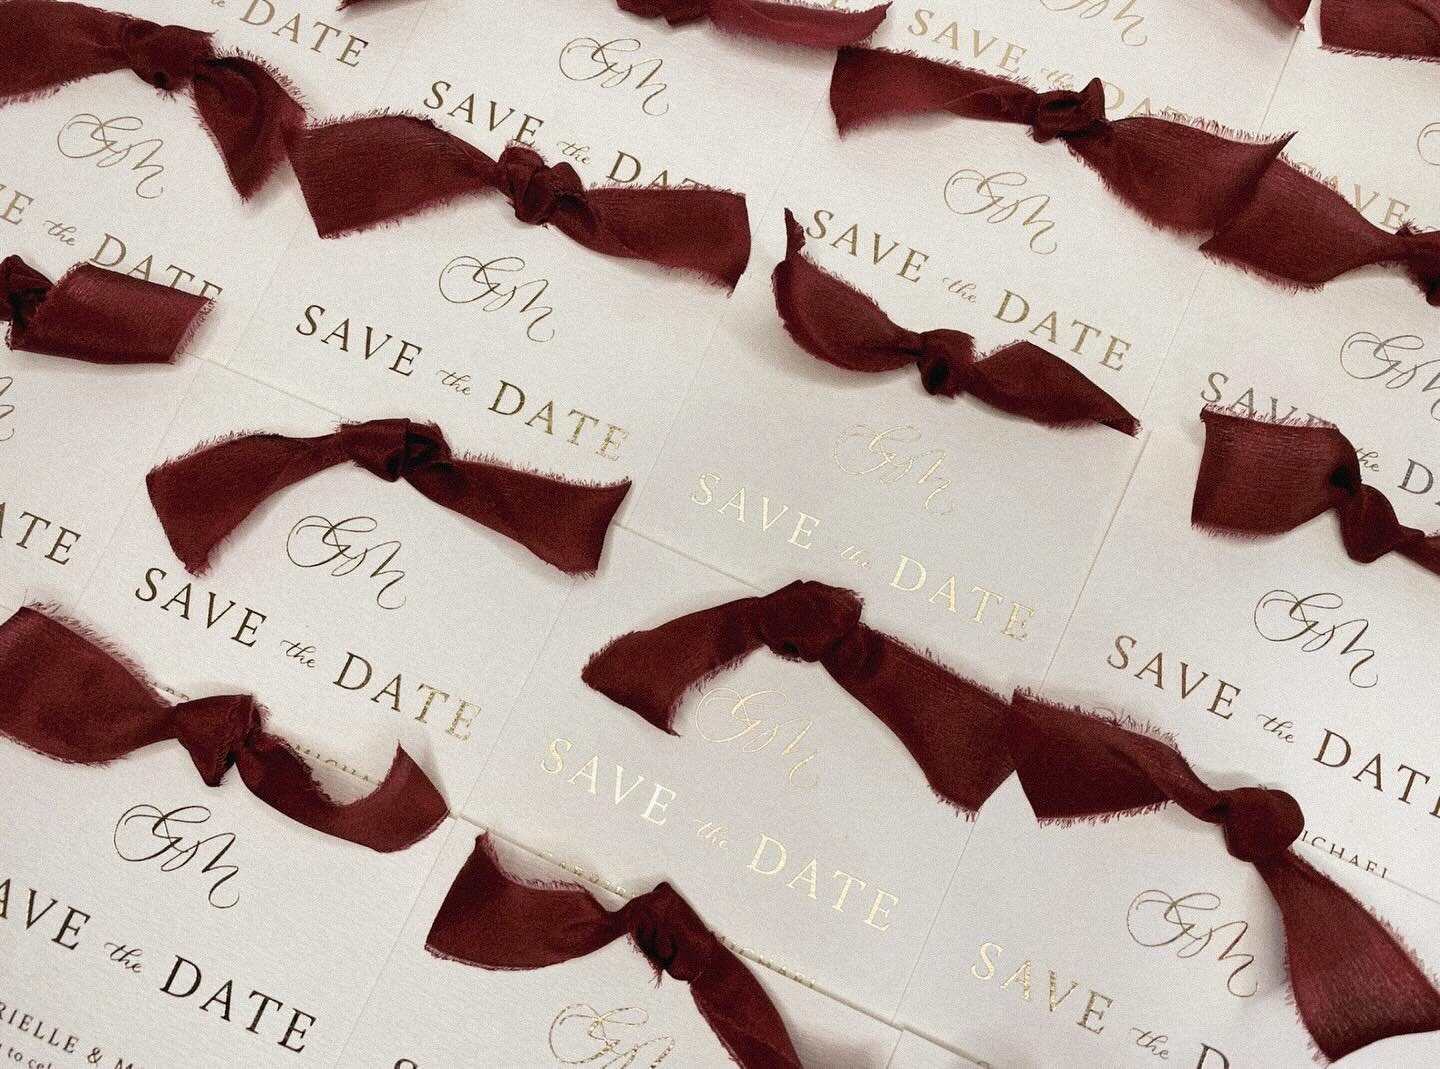 Hot foil save the dates for G &amp; M with burgundy ribbon 🤍

#hotfoilinvitations #metallicinvitations #goldweddinginvitations #savethedate #savethedatecards #weddingsavethedates #silkribboninvitation #goldweddinginvitation #goldweddinginspiration #